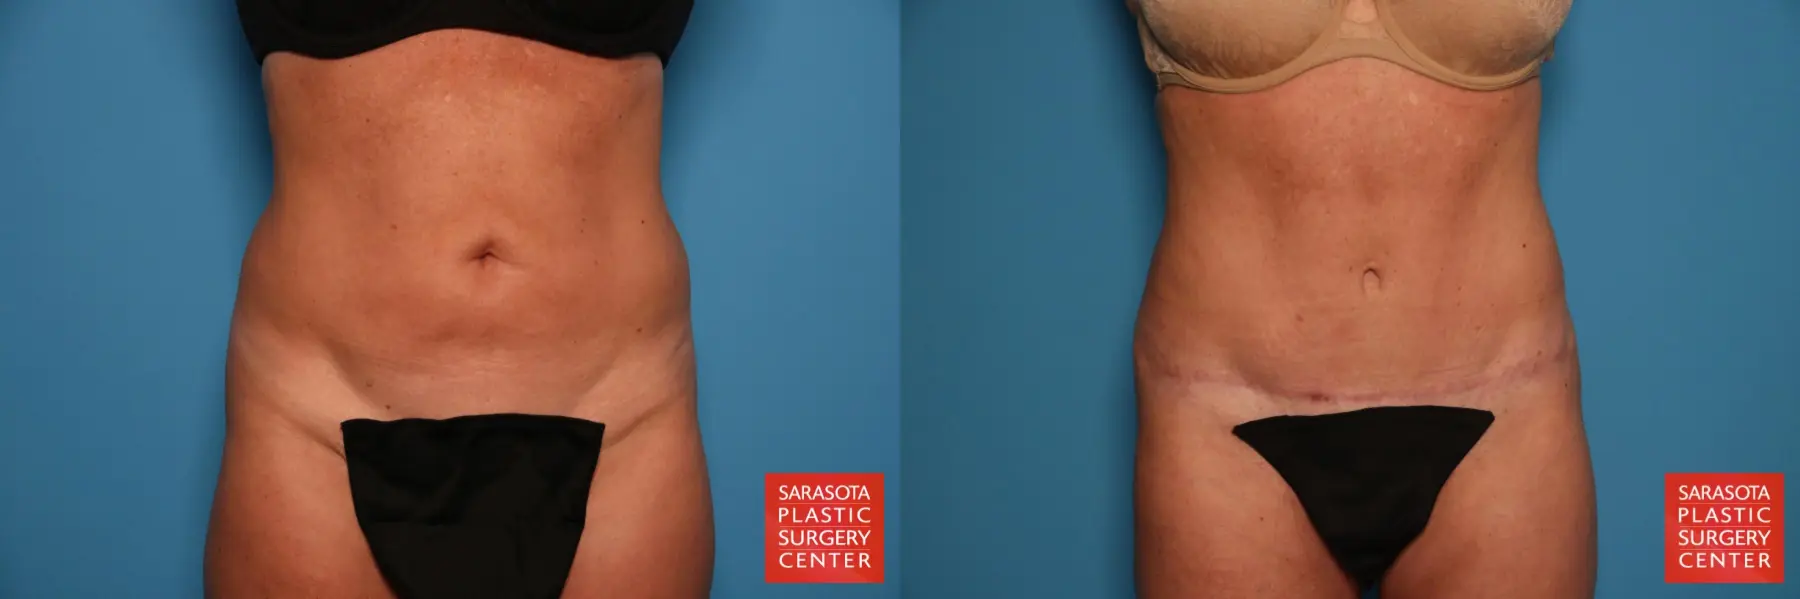 Tummy Tuck: Patient 10 - Before and After 1